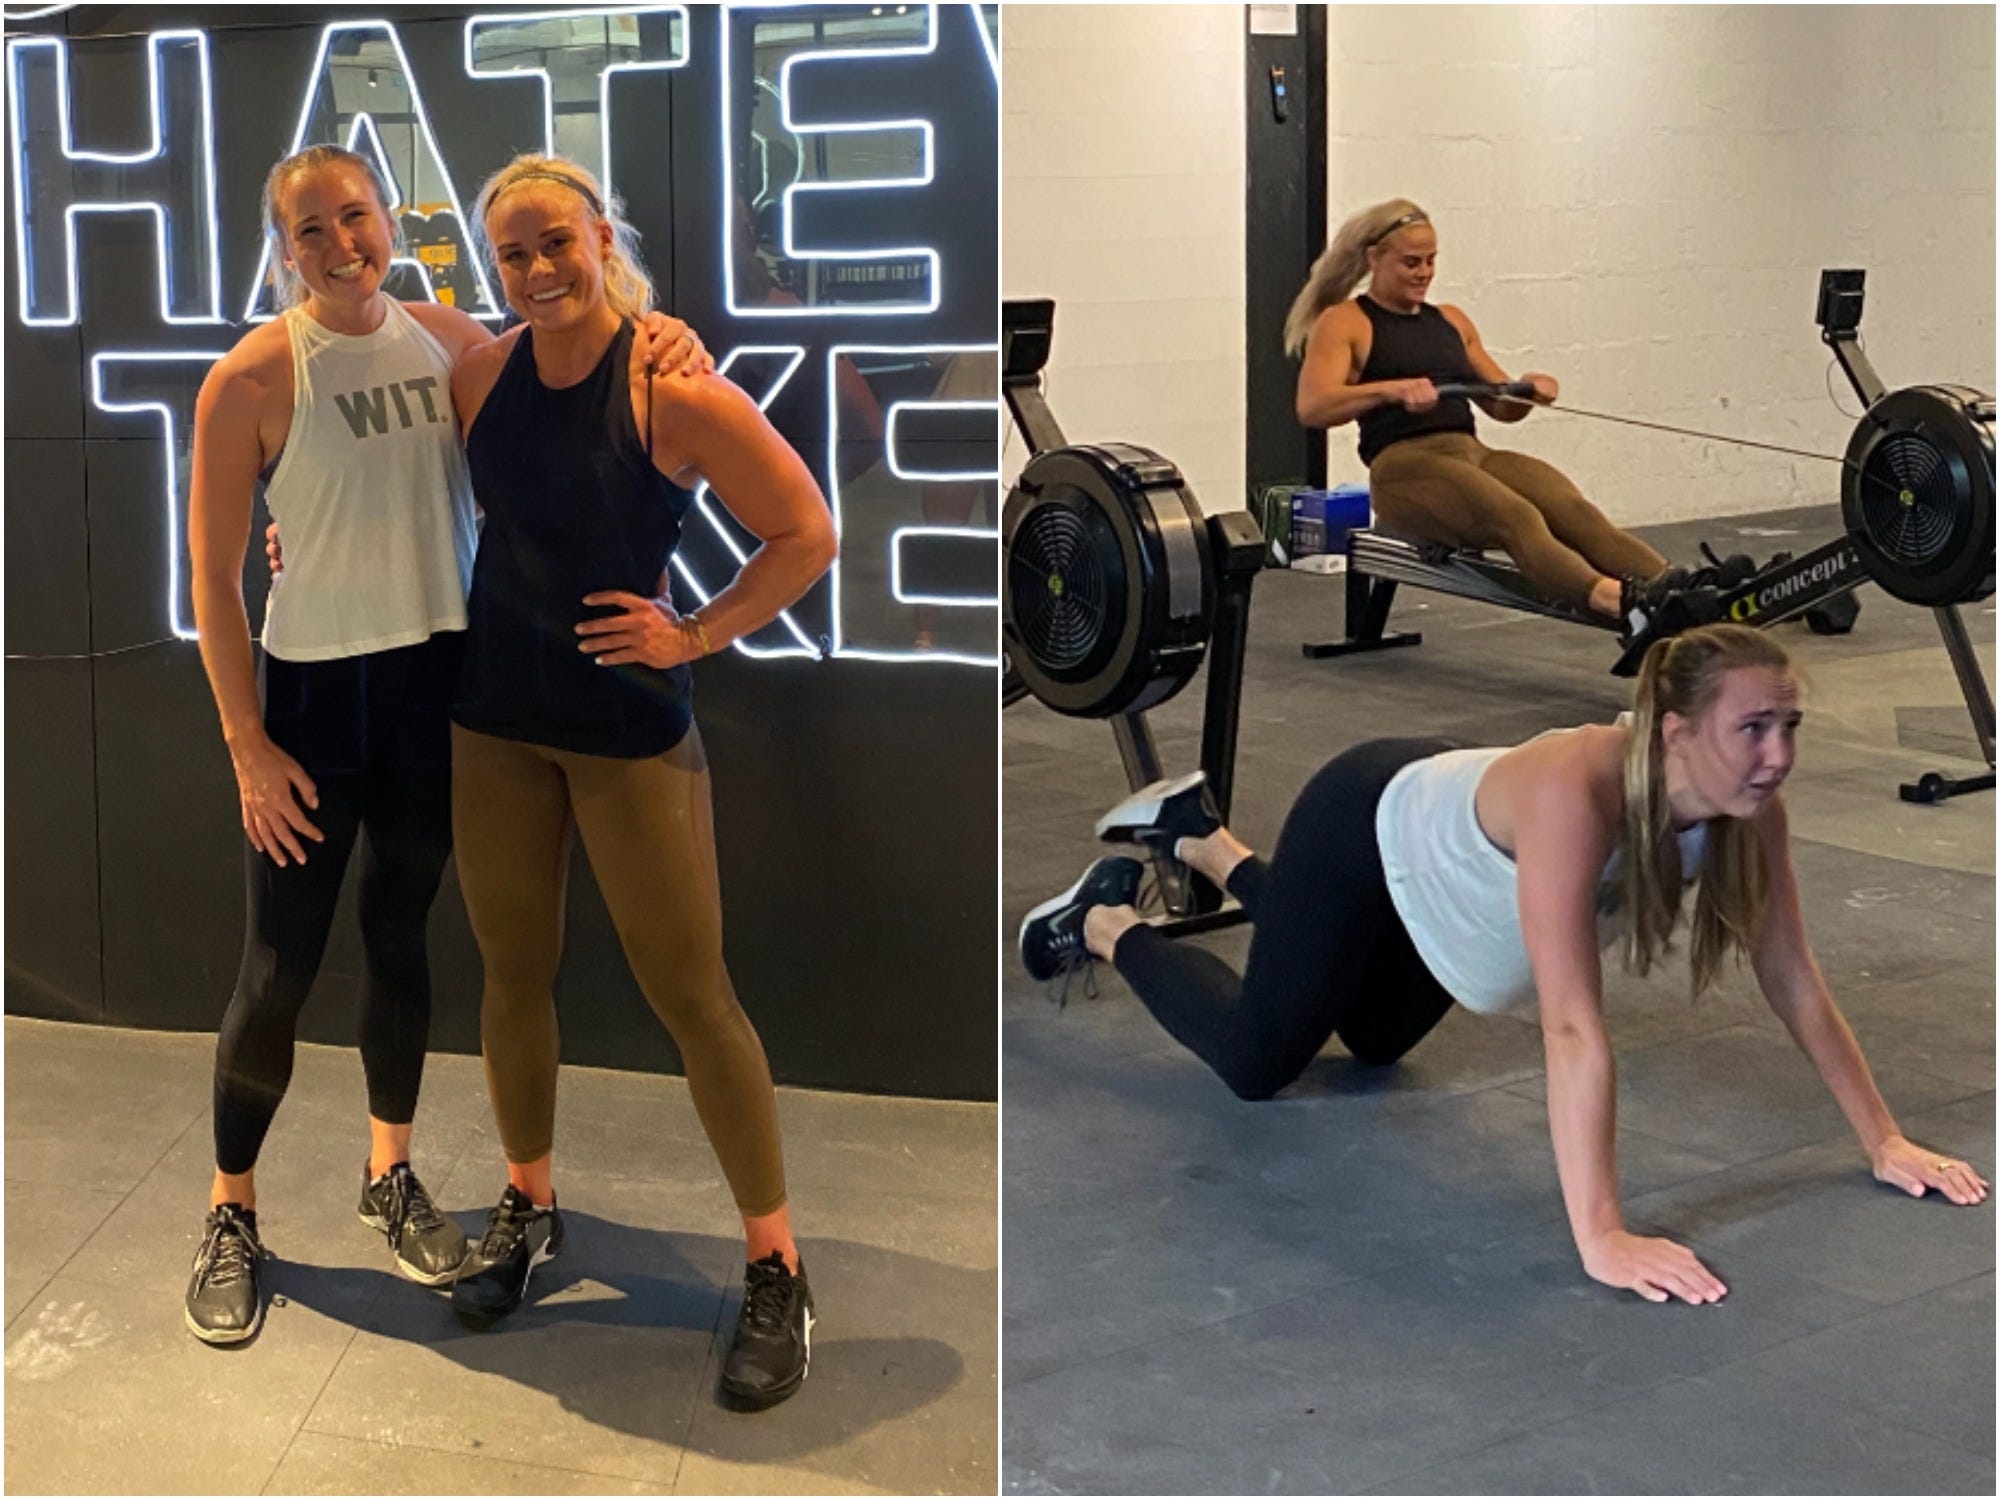 vriendelijke groet Vier mooi I trained with Crossfit star Sara Sigmundsdottir for just 20 minutes, and  she kicked my butt even though I work out 6 days a week